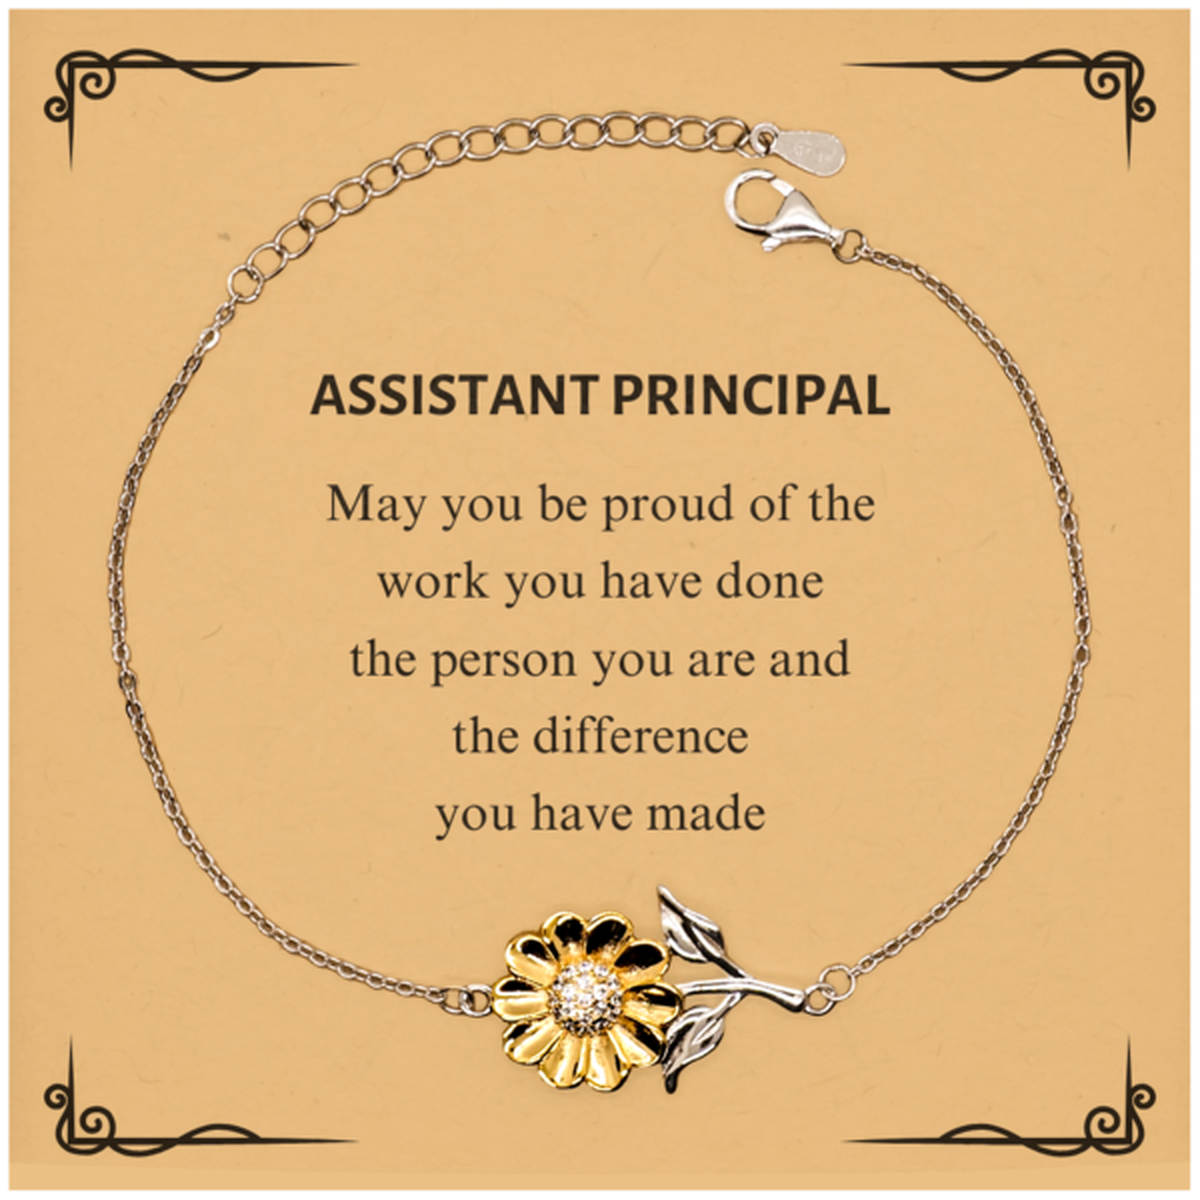 Assistant Principal May you be proud of the work you have done, Retirement Assistant Principal Sunflower Bracelet for Colleague Appreciation Gifts Amazing for Assistant Principal